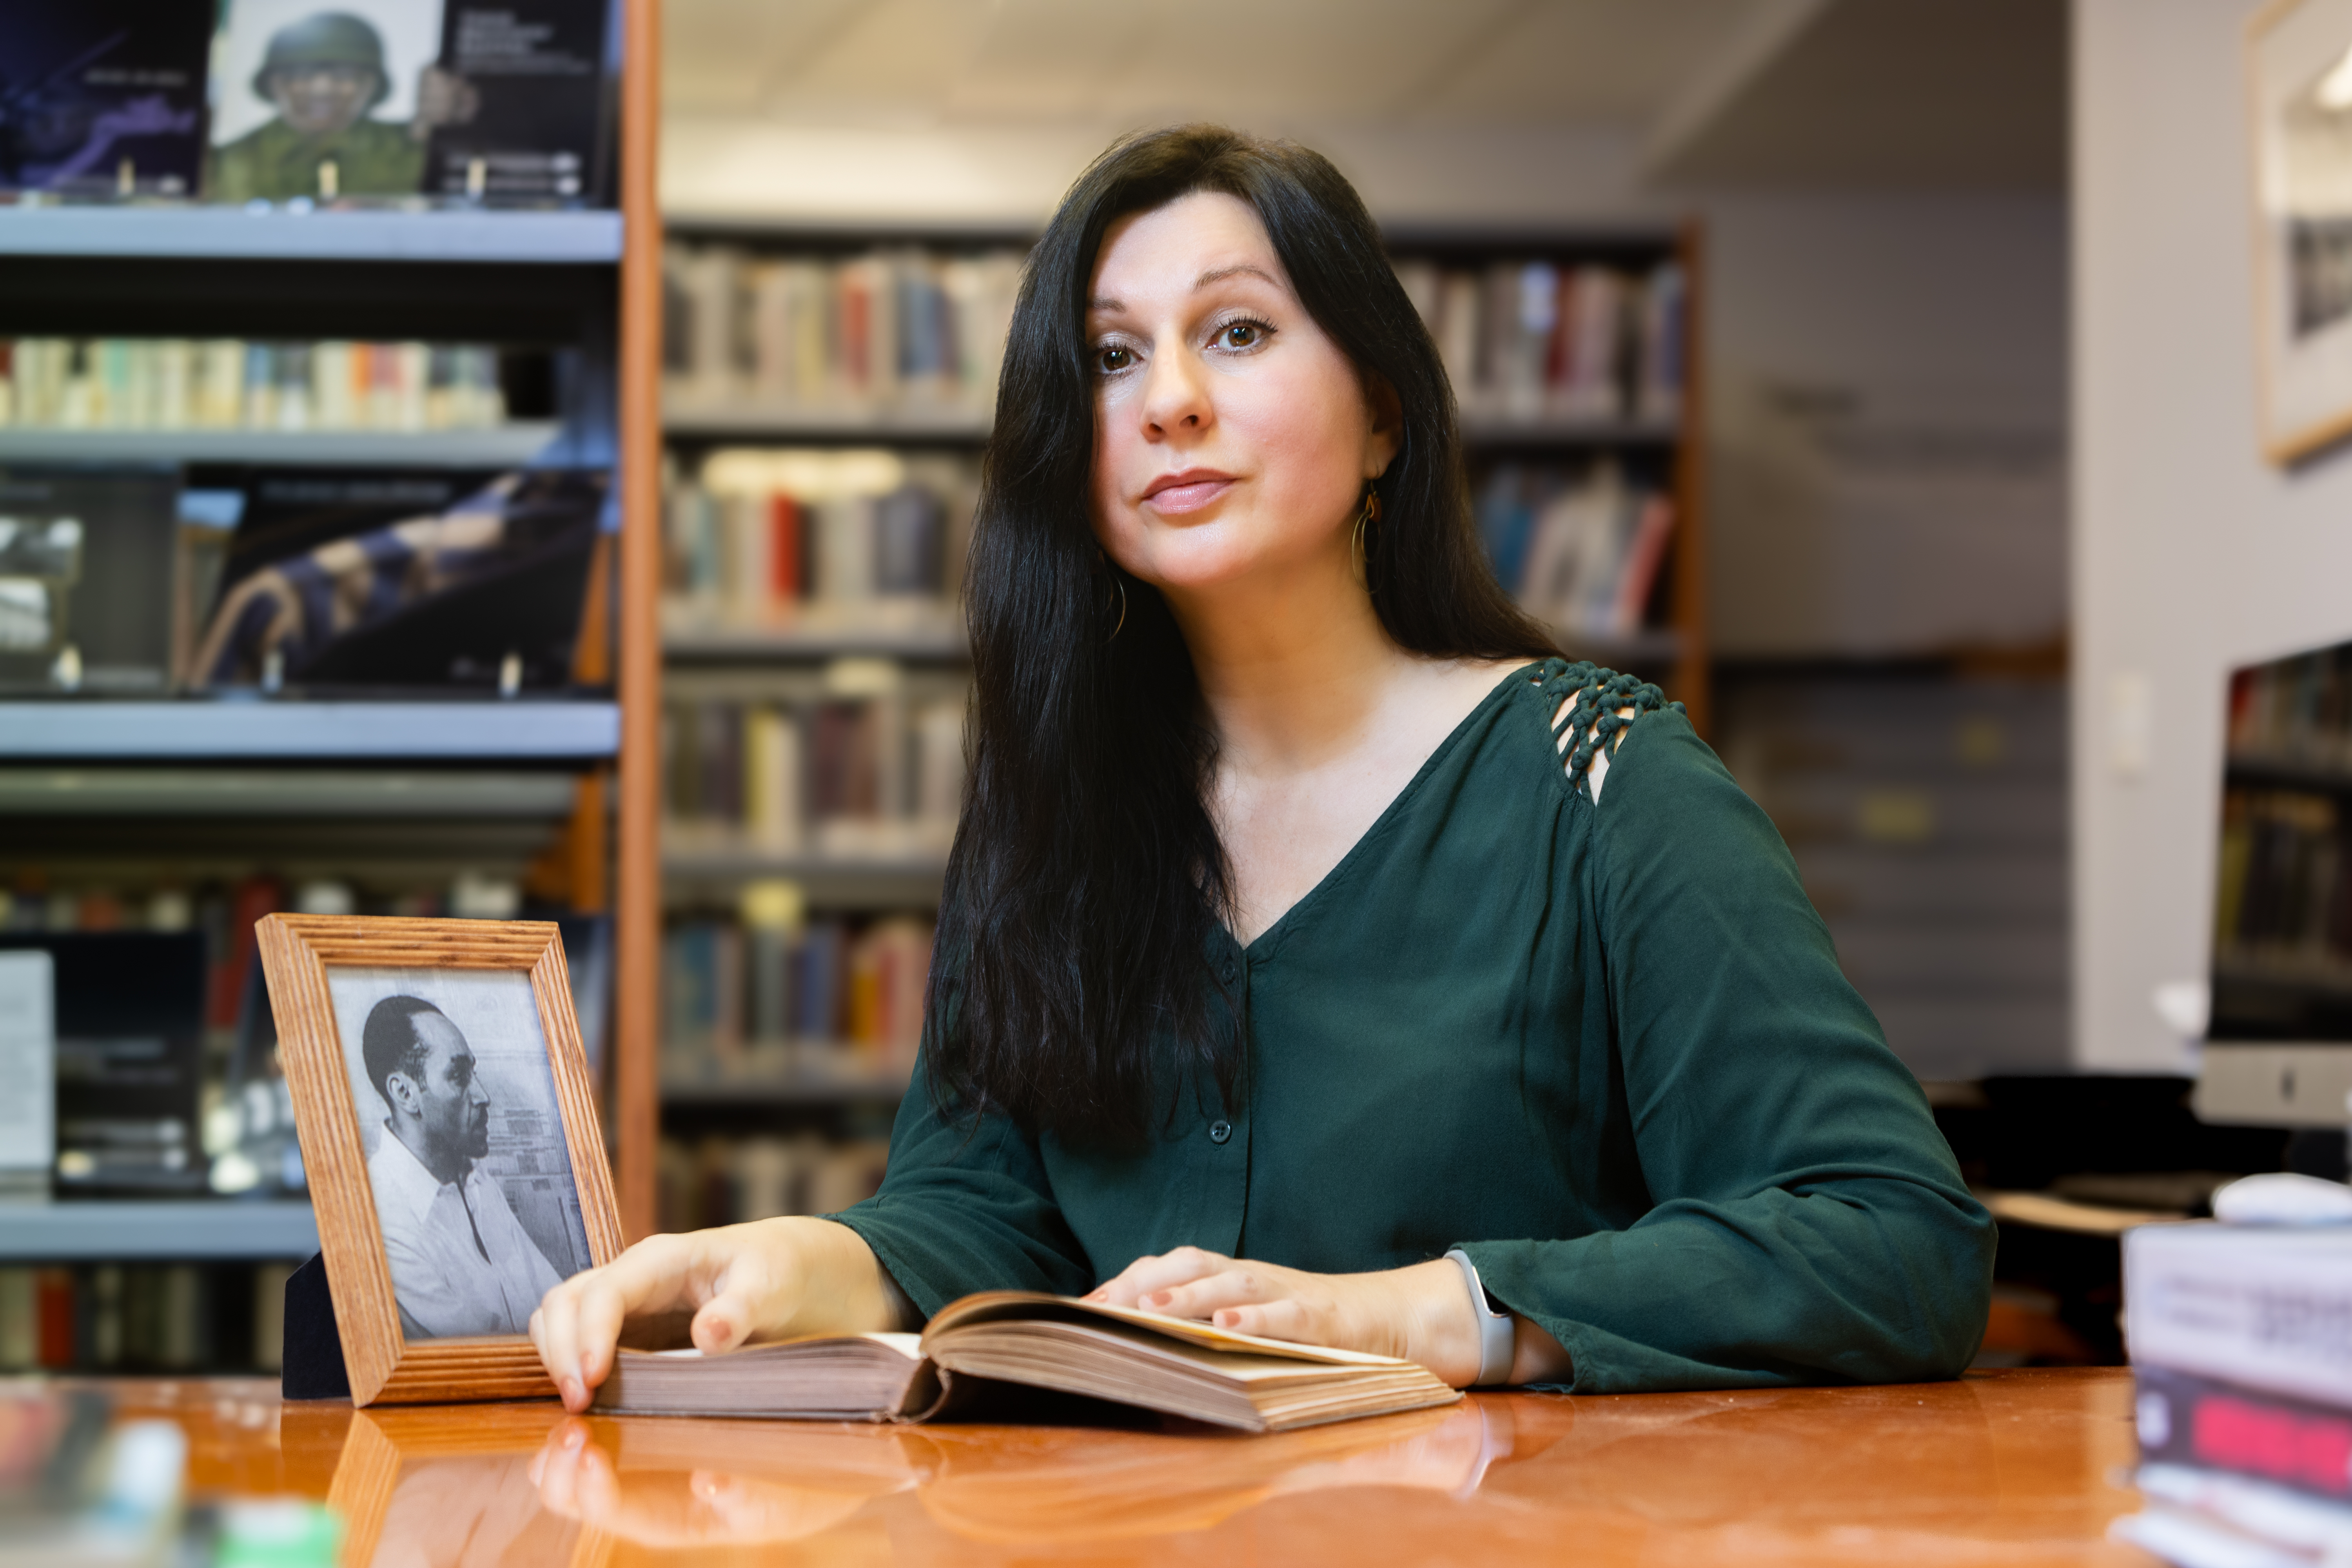 Agnieszka Tuszynska in a library with a book in hand and framed photo 